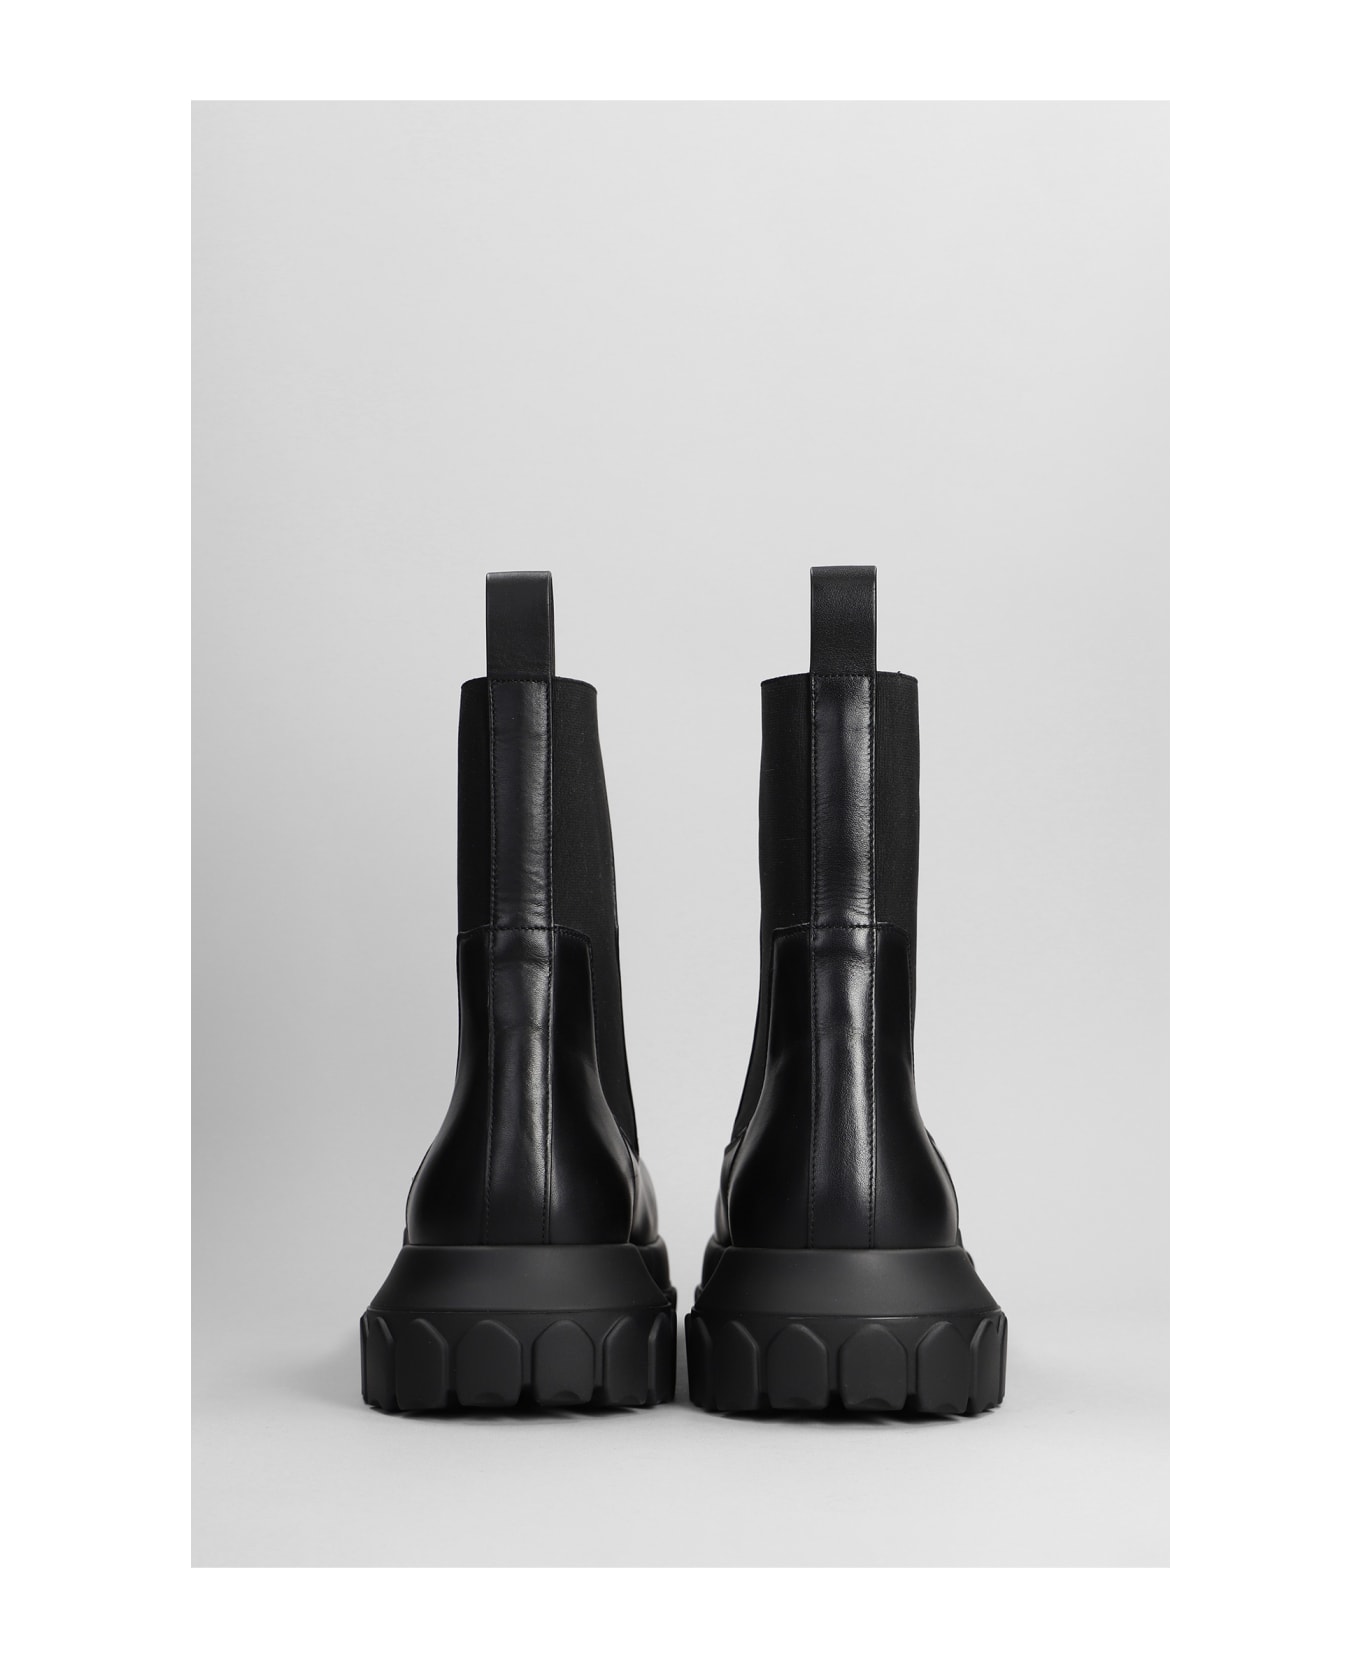 Rick Owens Beatle Bozo Tractor Combat Boots In Black Leather - black